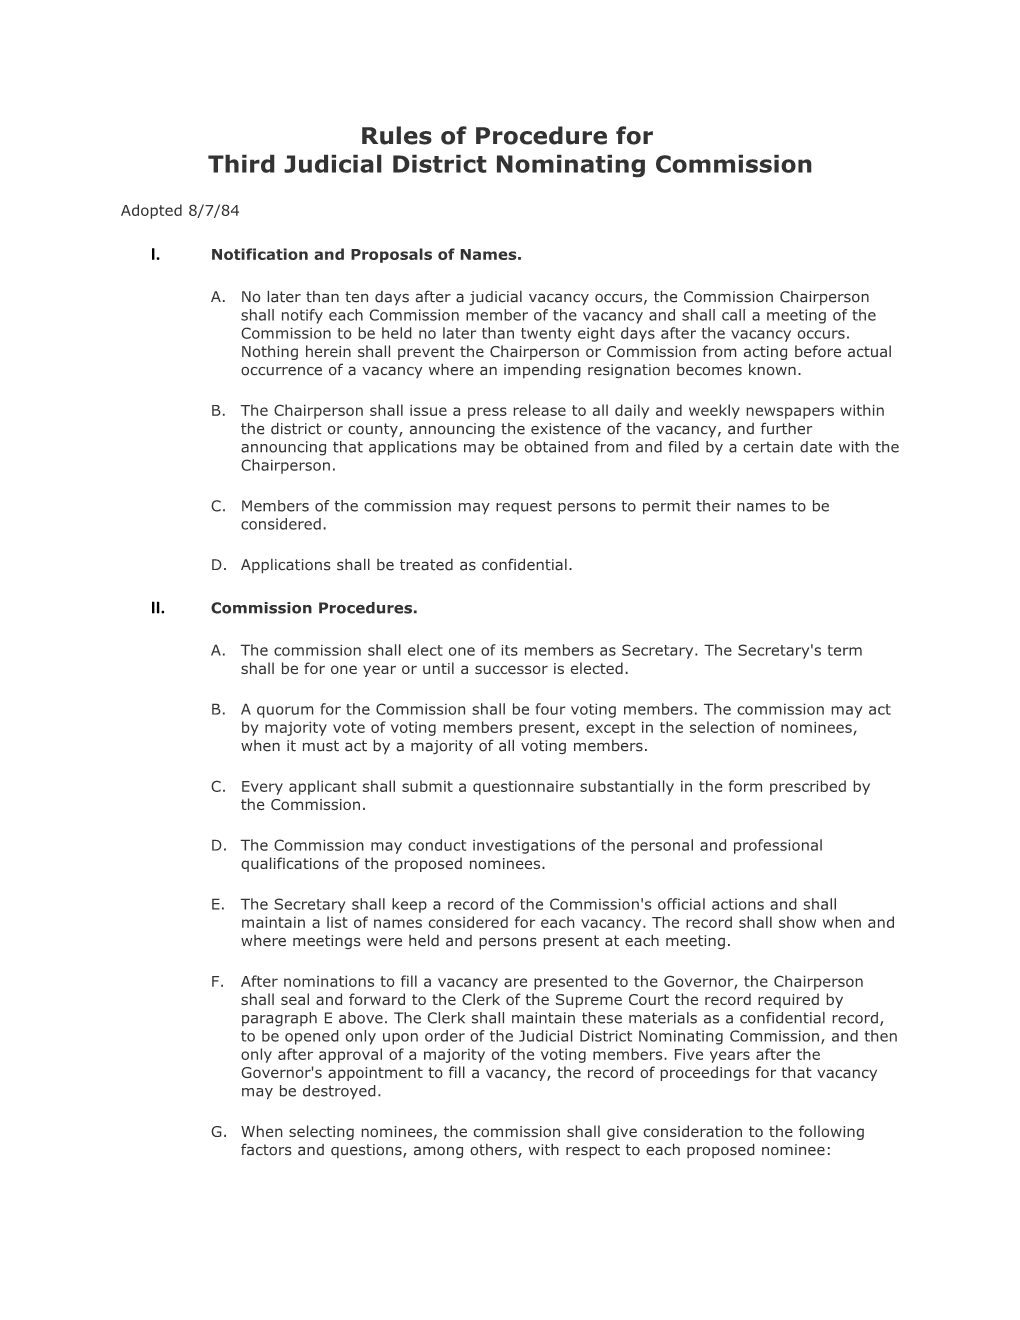 Rules of Procedure for Third Judicial District Nominating Commission